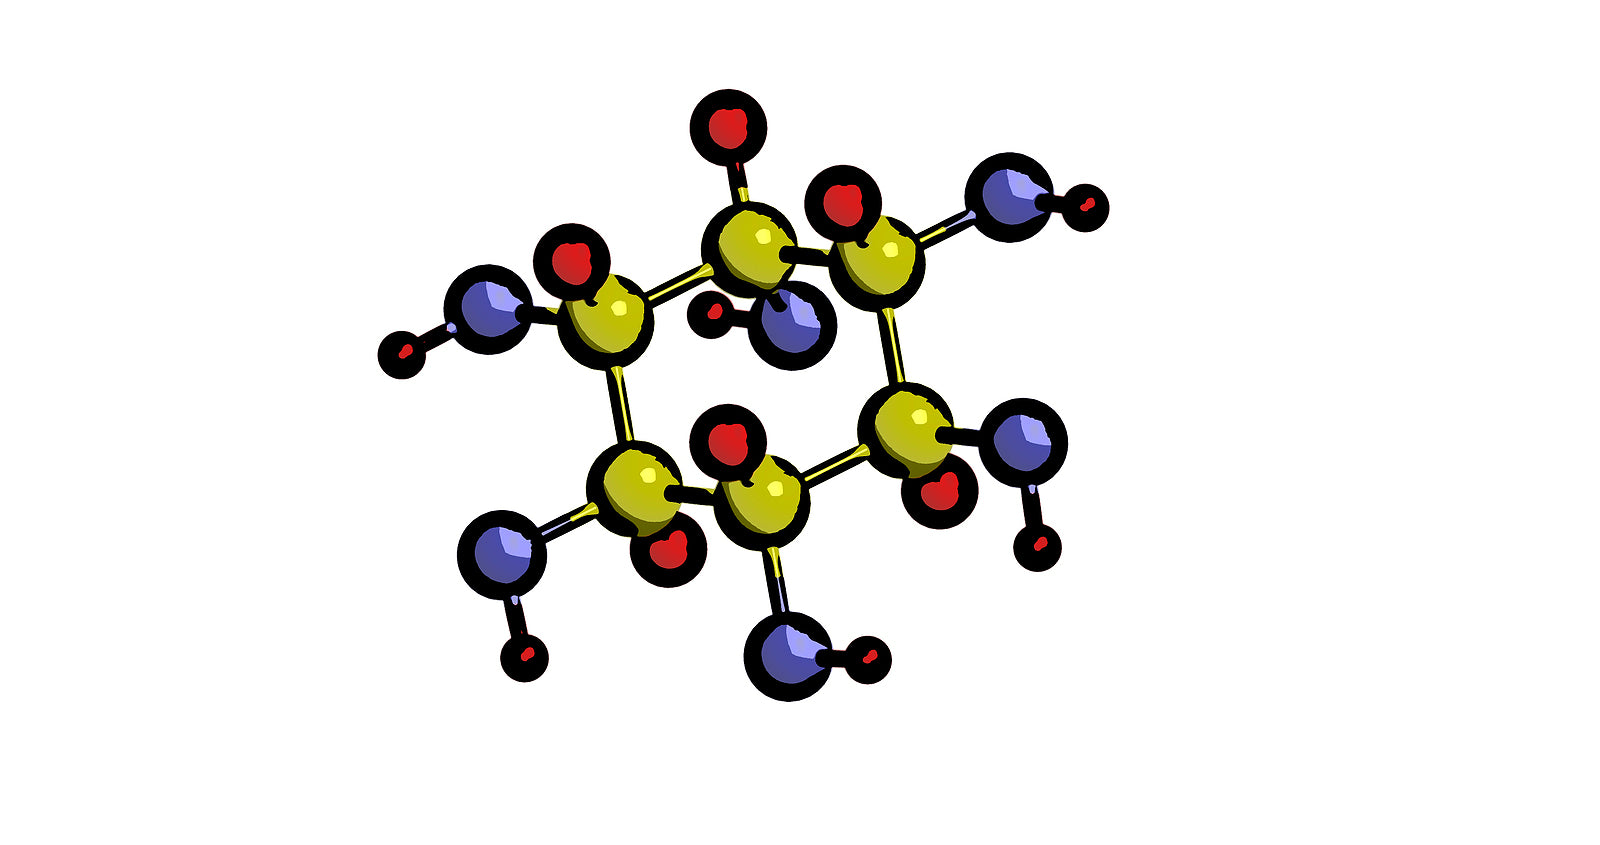 The molecular structure of inositol